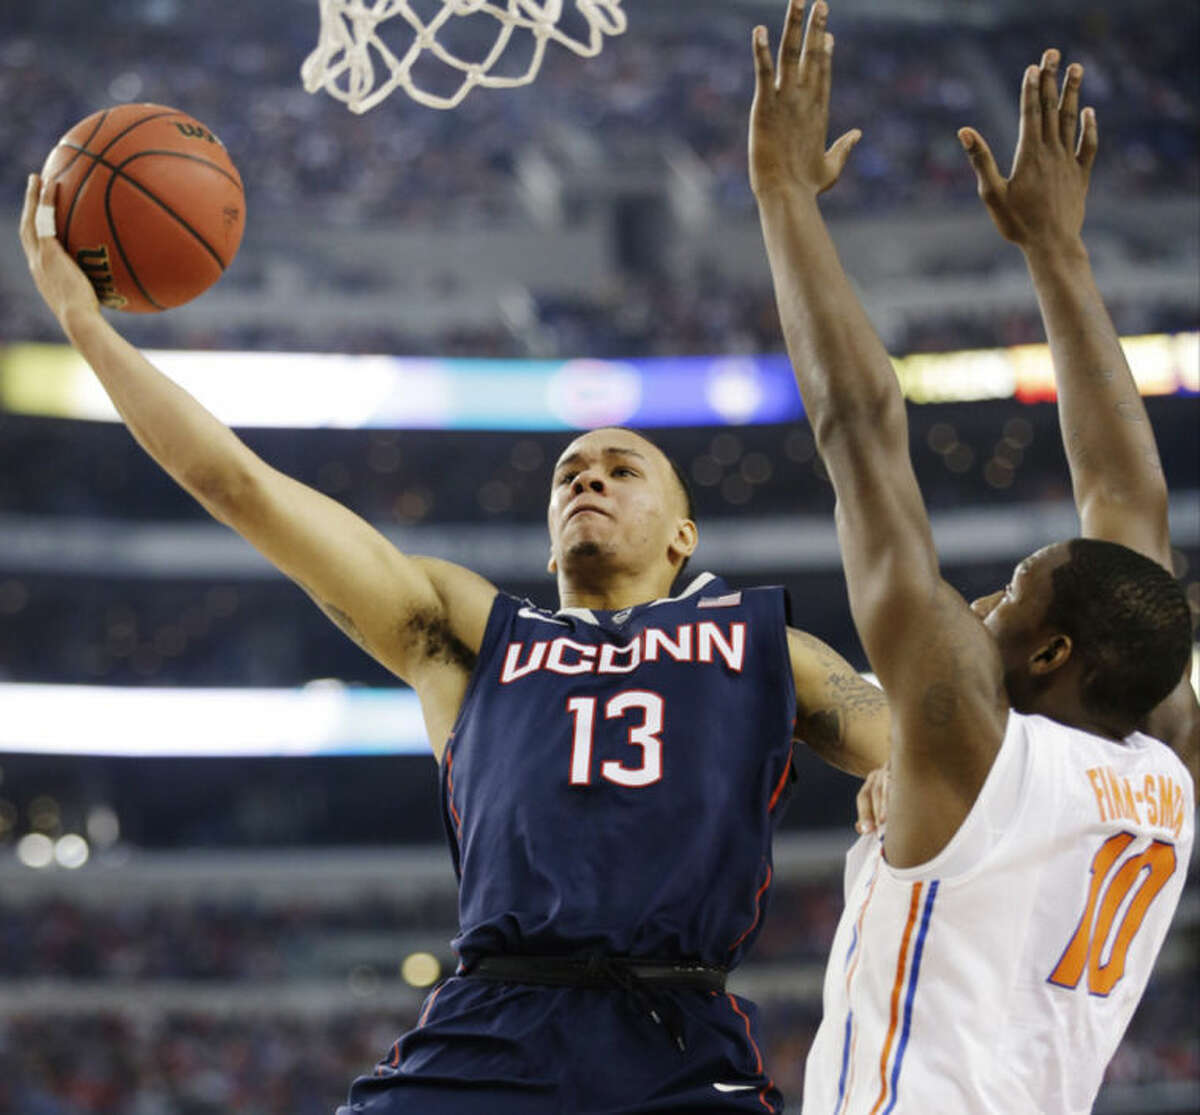 Connecticut guard Shabazz Napier (13) shoots as Florida forward Dorian Finney-Smith (10) defends during the first half of the NCAA Final Four tournament college basketball semifinal game Saturday, April 5, 2014, in Arlington, Texas. (AP Photo/David J. Phillip)